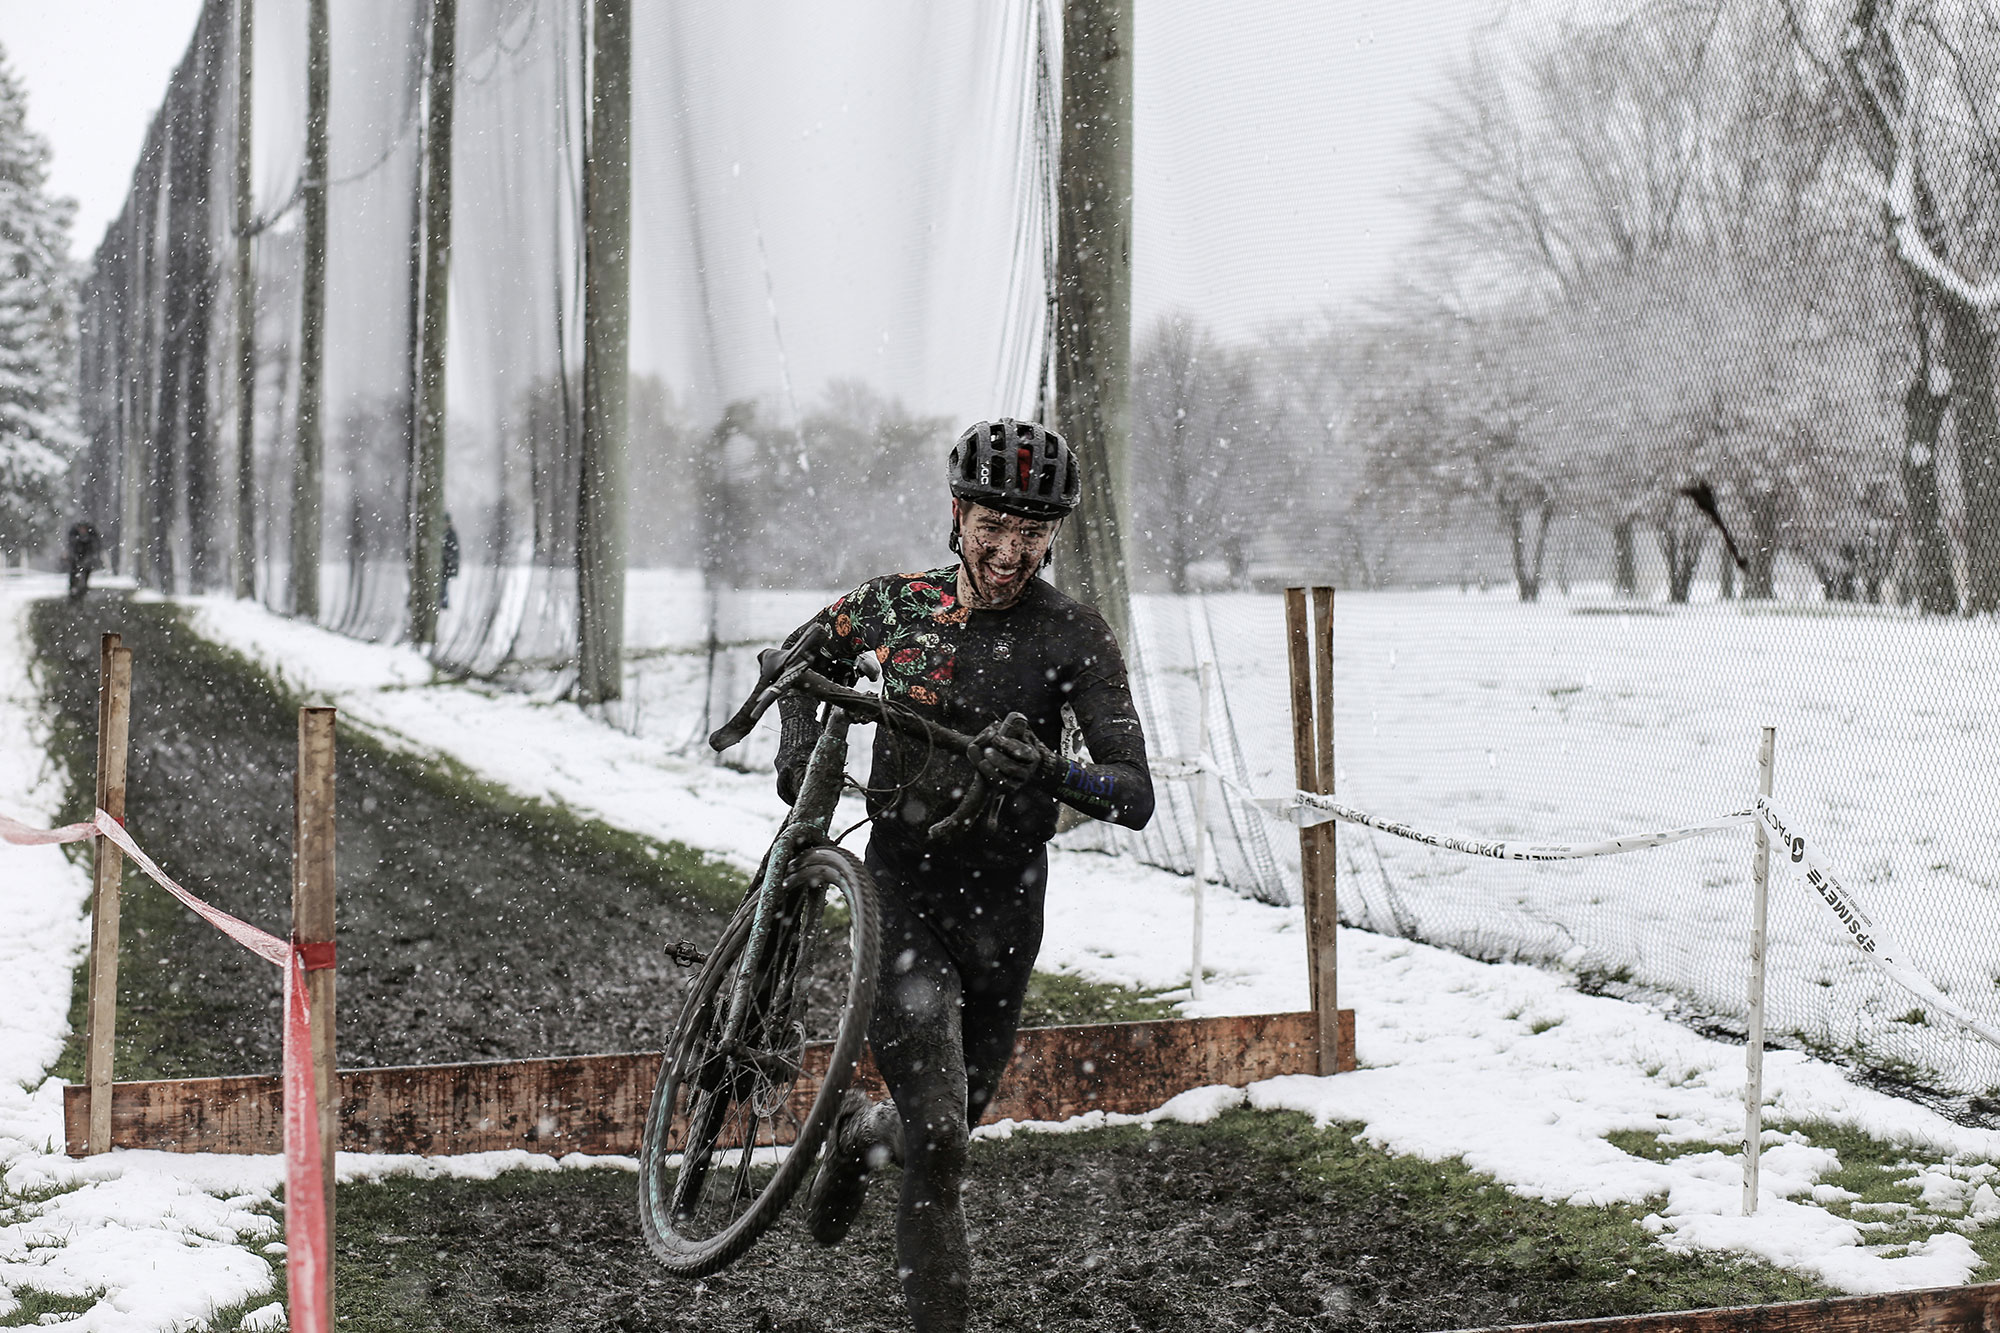 Chicago Cross Cup 2018